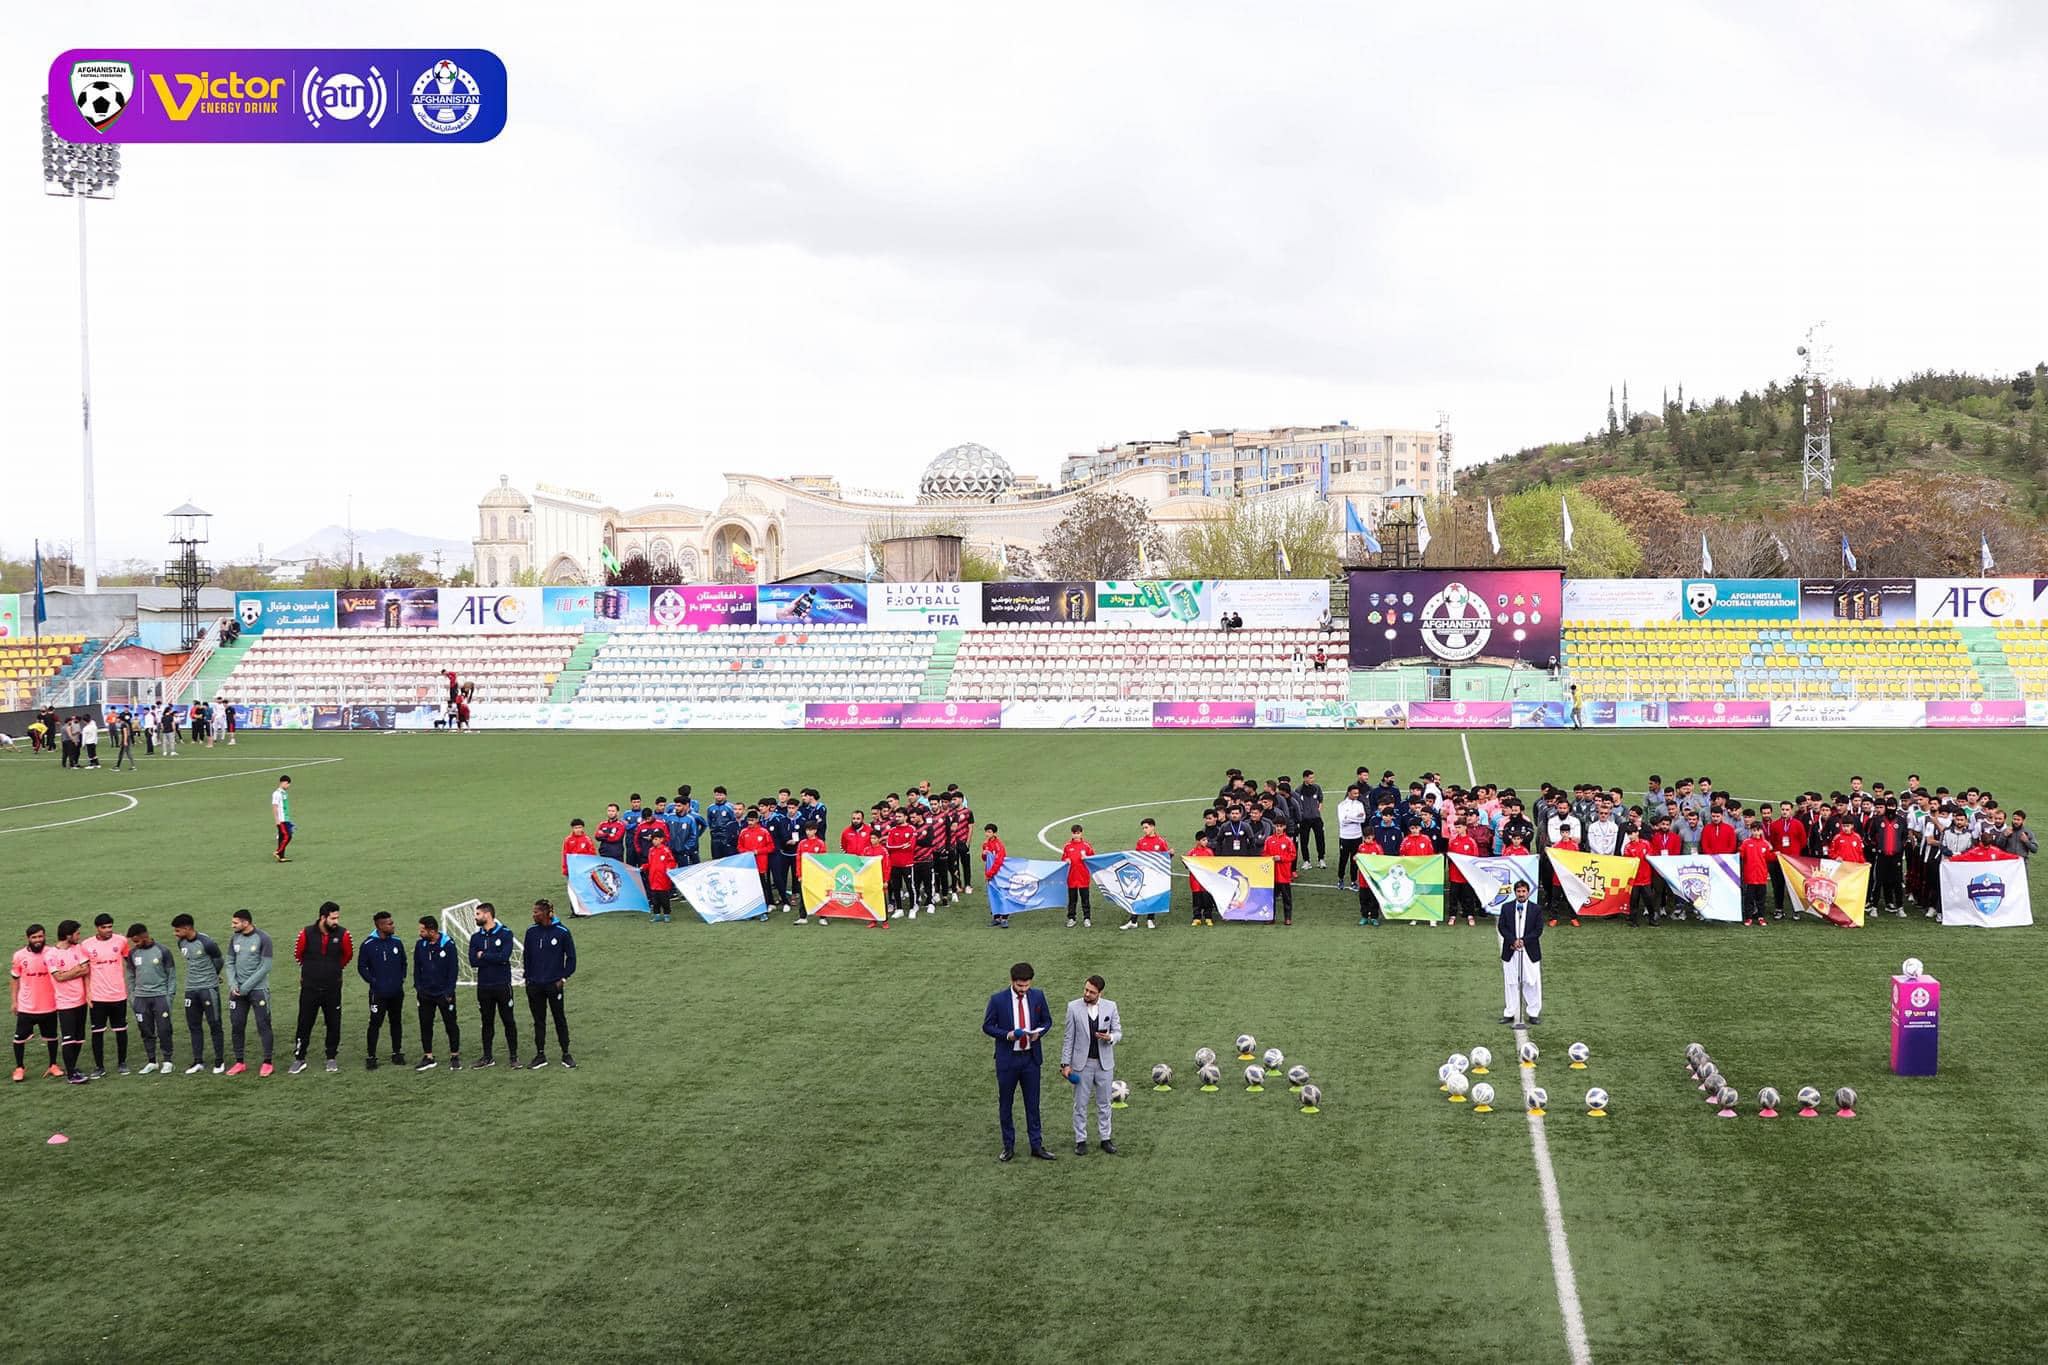 Empty seats in Kabul's football stadium underscore the absence of female spectators. Girls, once passionate football fans, now face restrictions on education and work under the current leadership.